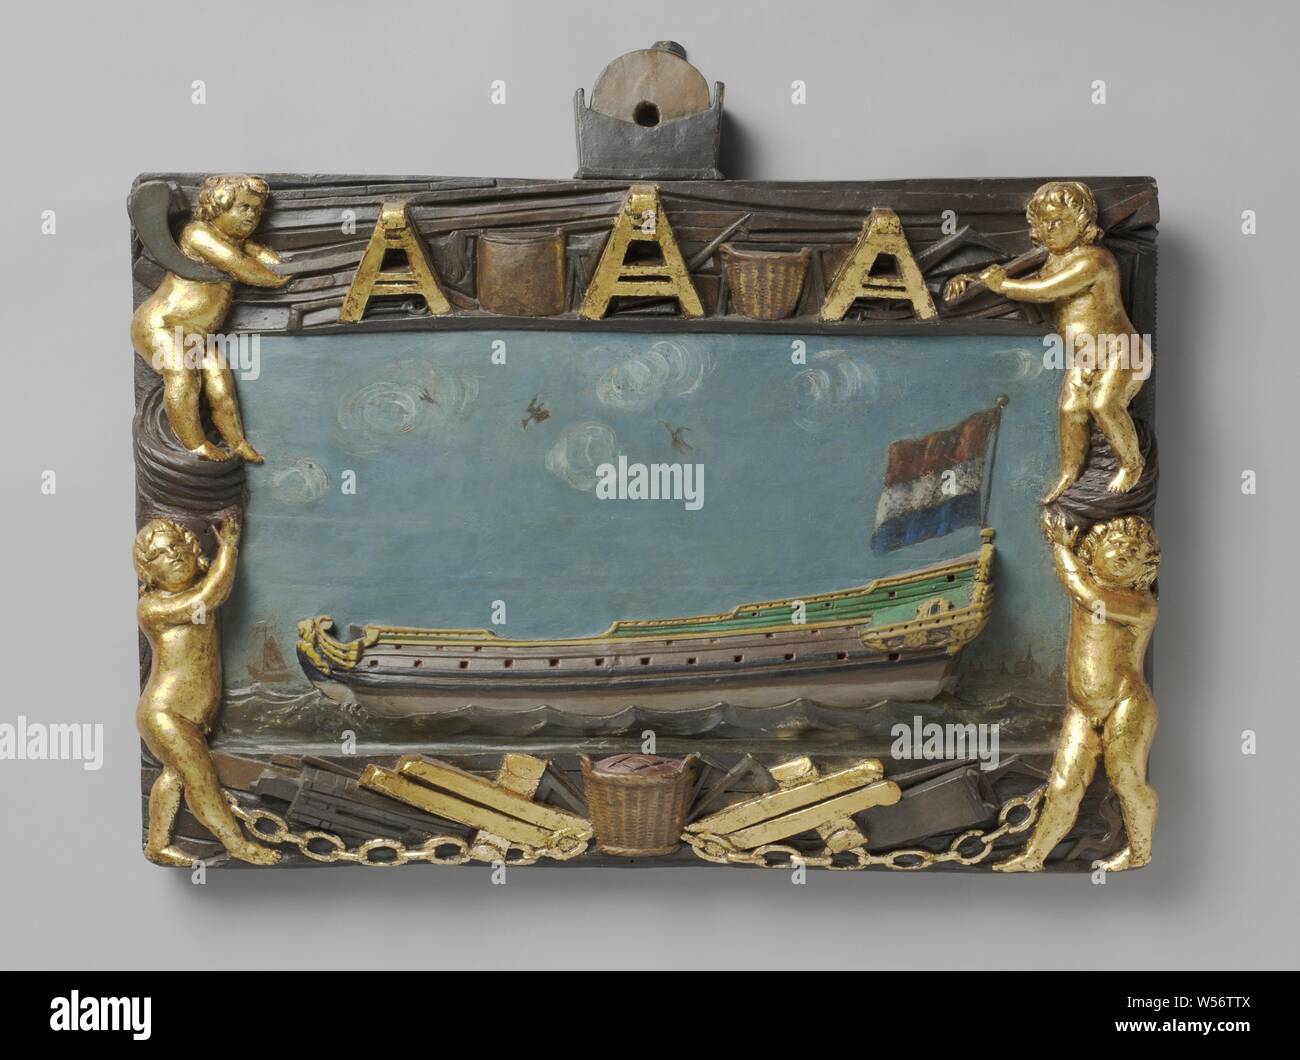 Sign of a Shipyard, sign with an image of a ship's hull. The signboard is probably from a shipyard or from the ship's carpenter's guild. The cut ship's hull is surrounded by four cupids and various professional attributes. The whole depends on a sharpening stone., Shipbuilding industry, anonymous, Netherlands, 1600 - 1699, wood (plant material), h 62.5 cm × w 76 cm × d 8 cm Stock Photo